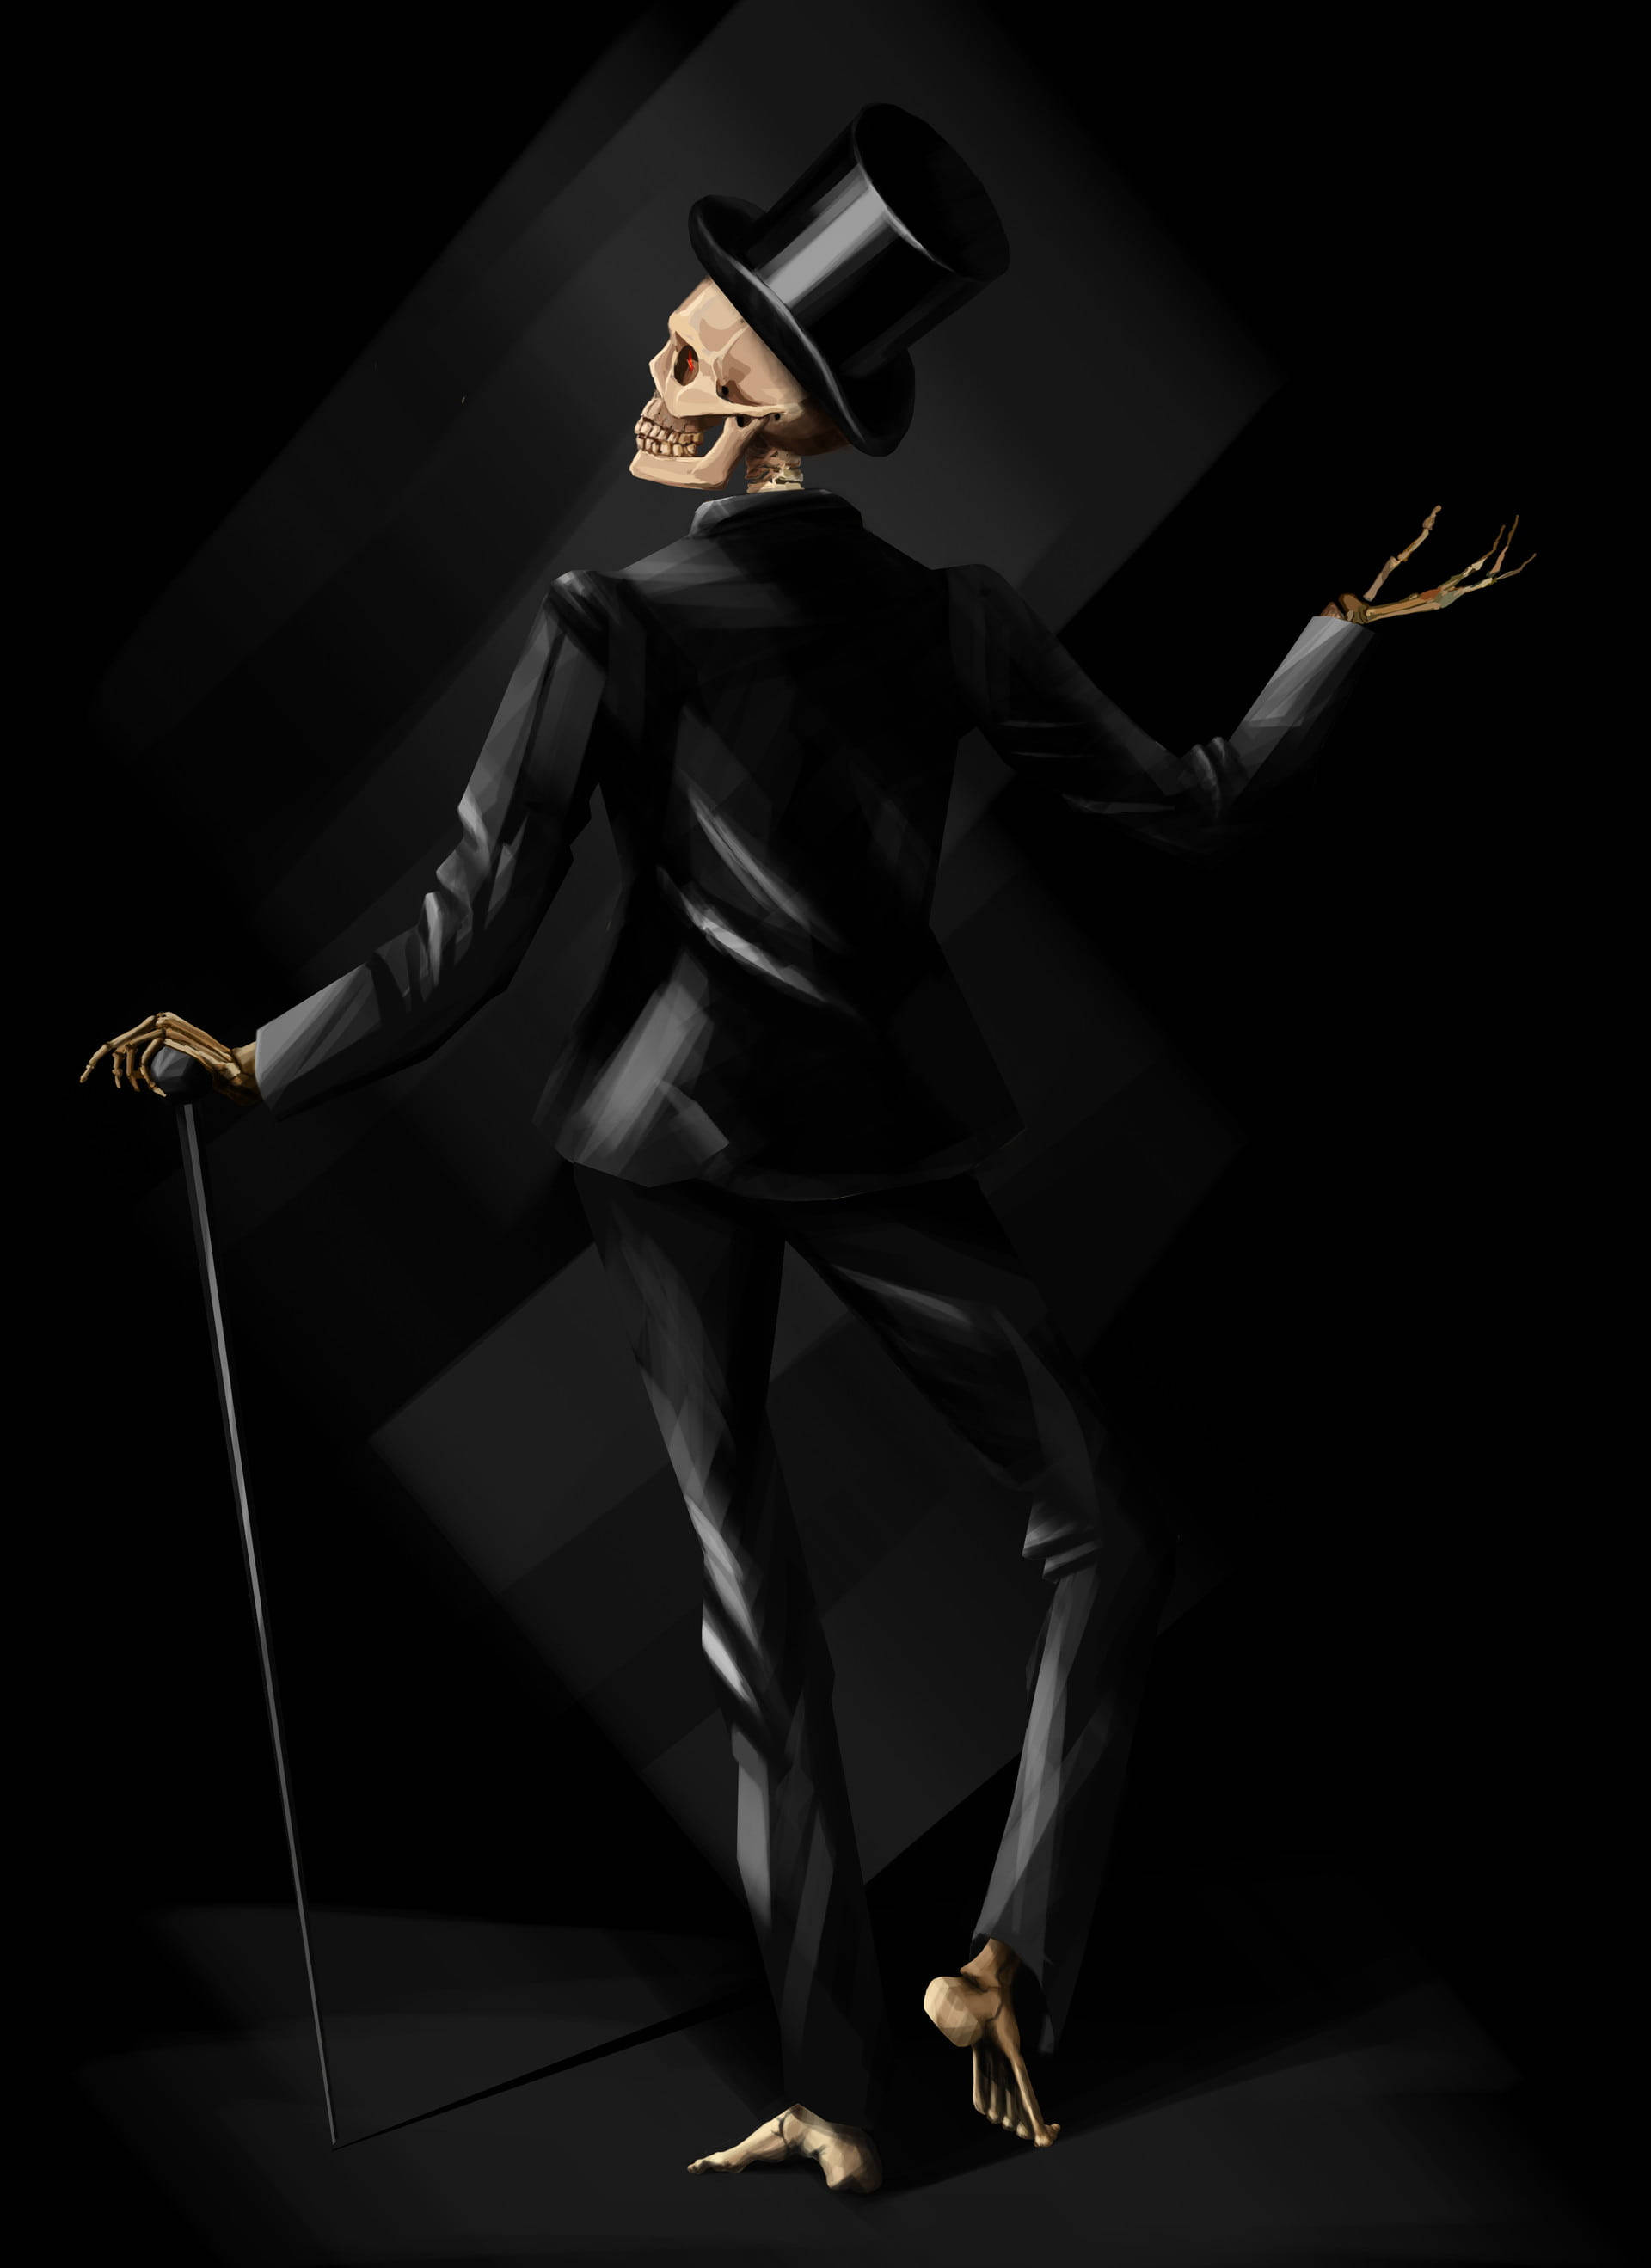 Dark Aesthetic: A Black Magician Suit On A Skeleton, Reflecting A Mysterious And Intriguing Vibe.